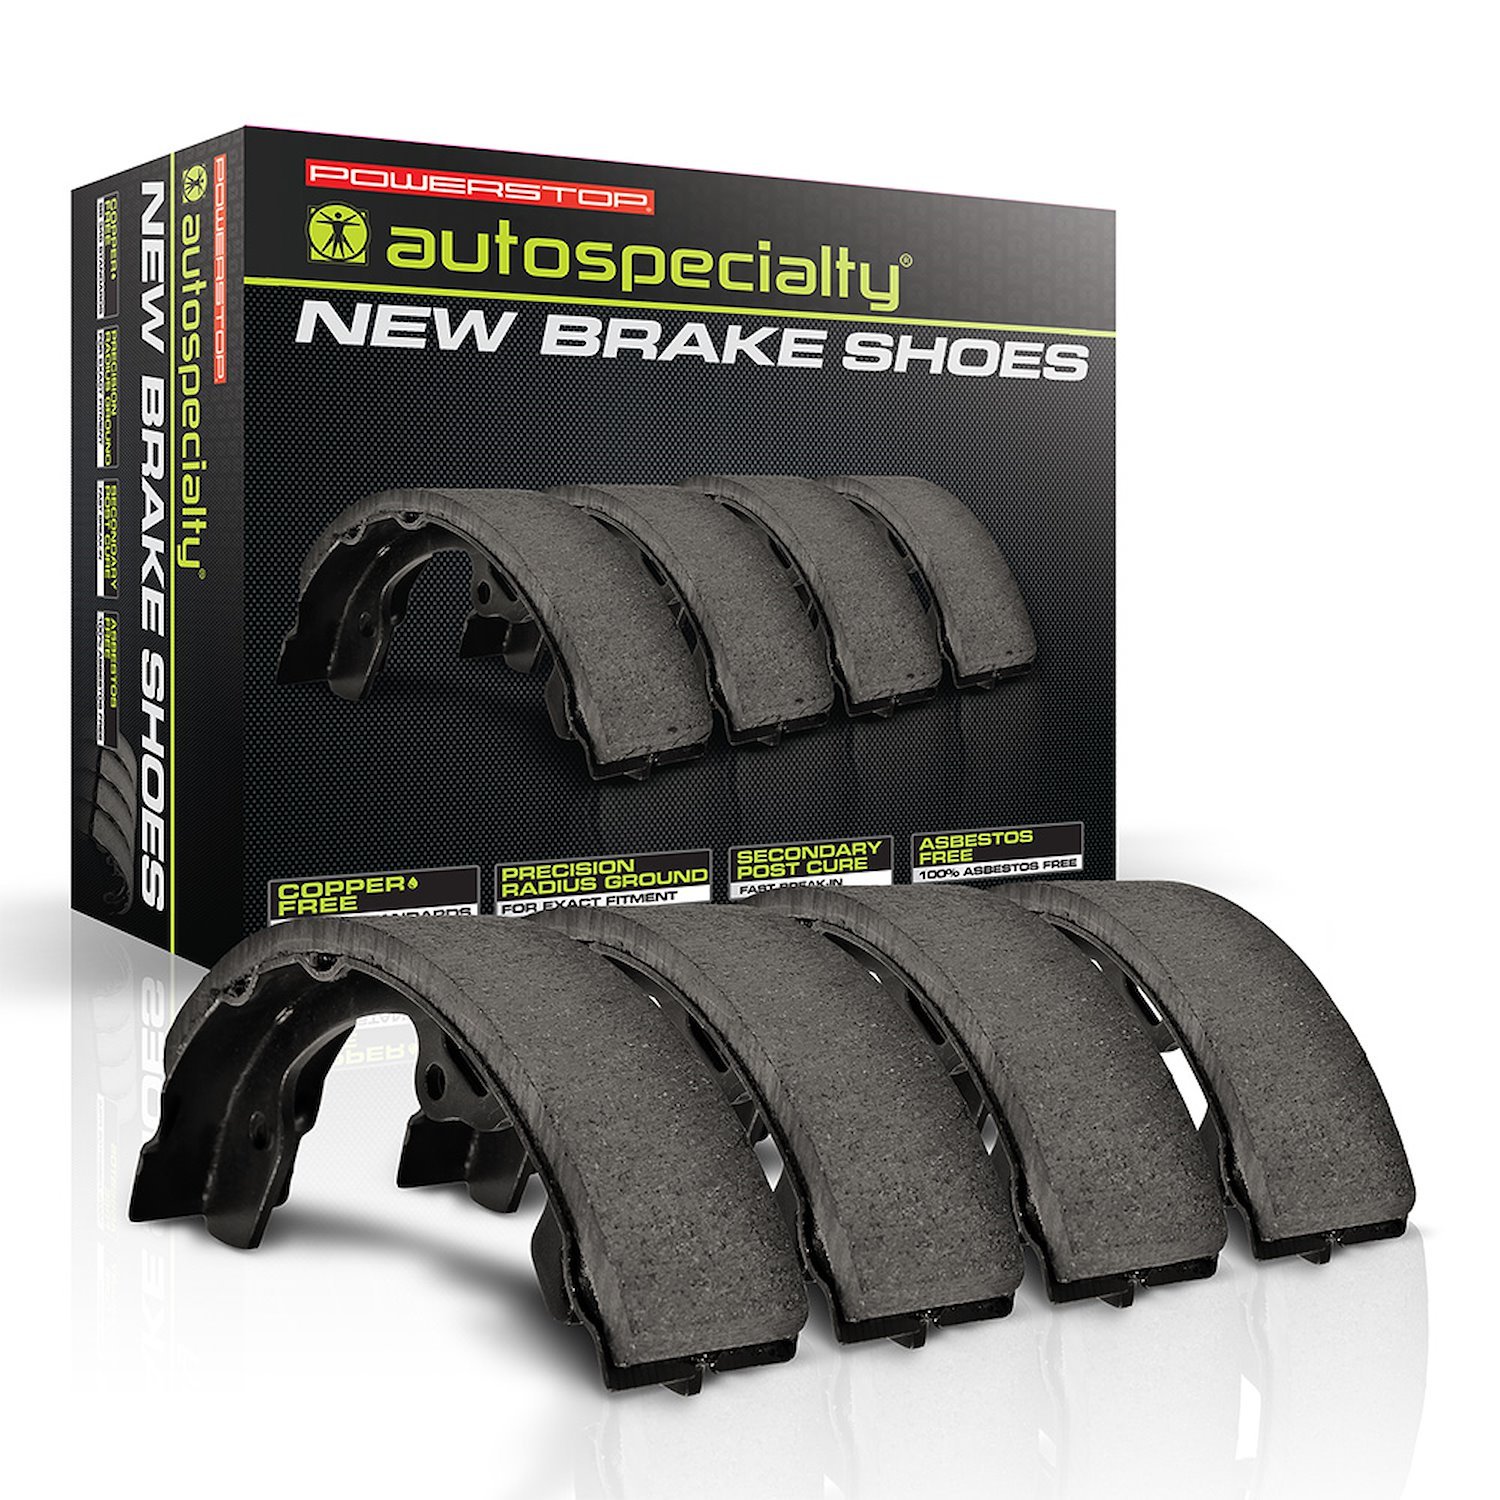 Autospecialty Brake Shoes